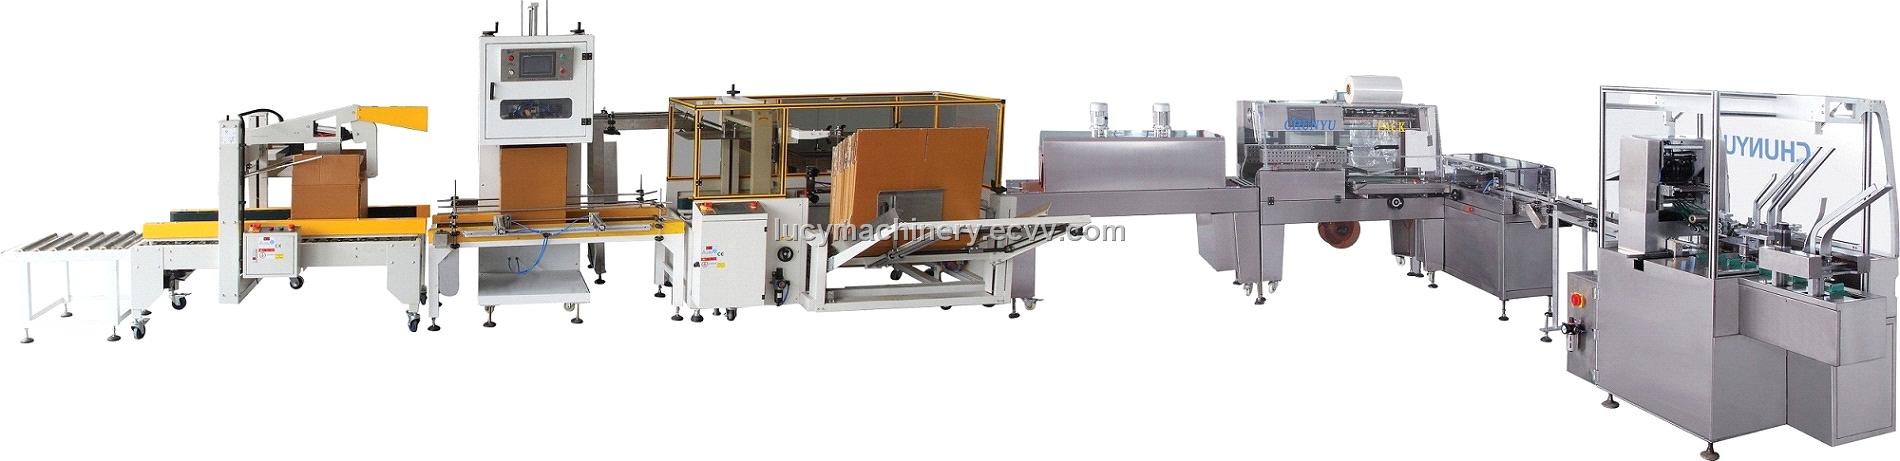 Automatic outside packaging line for products